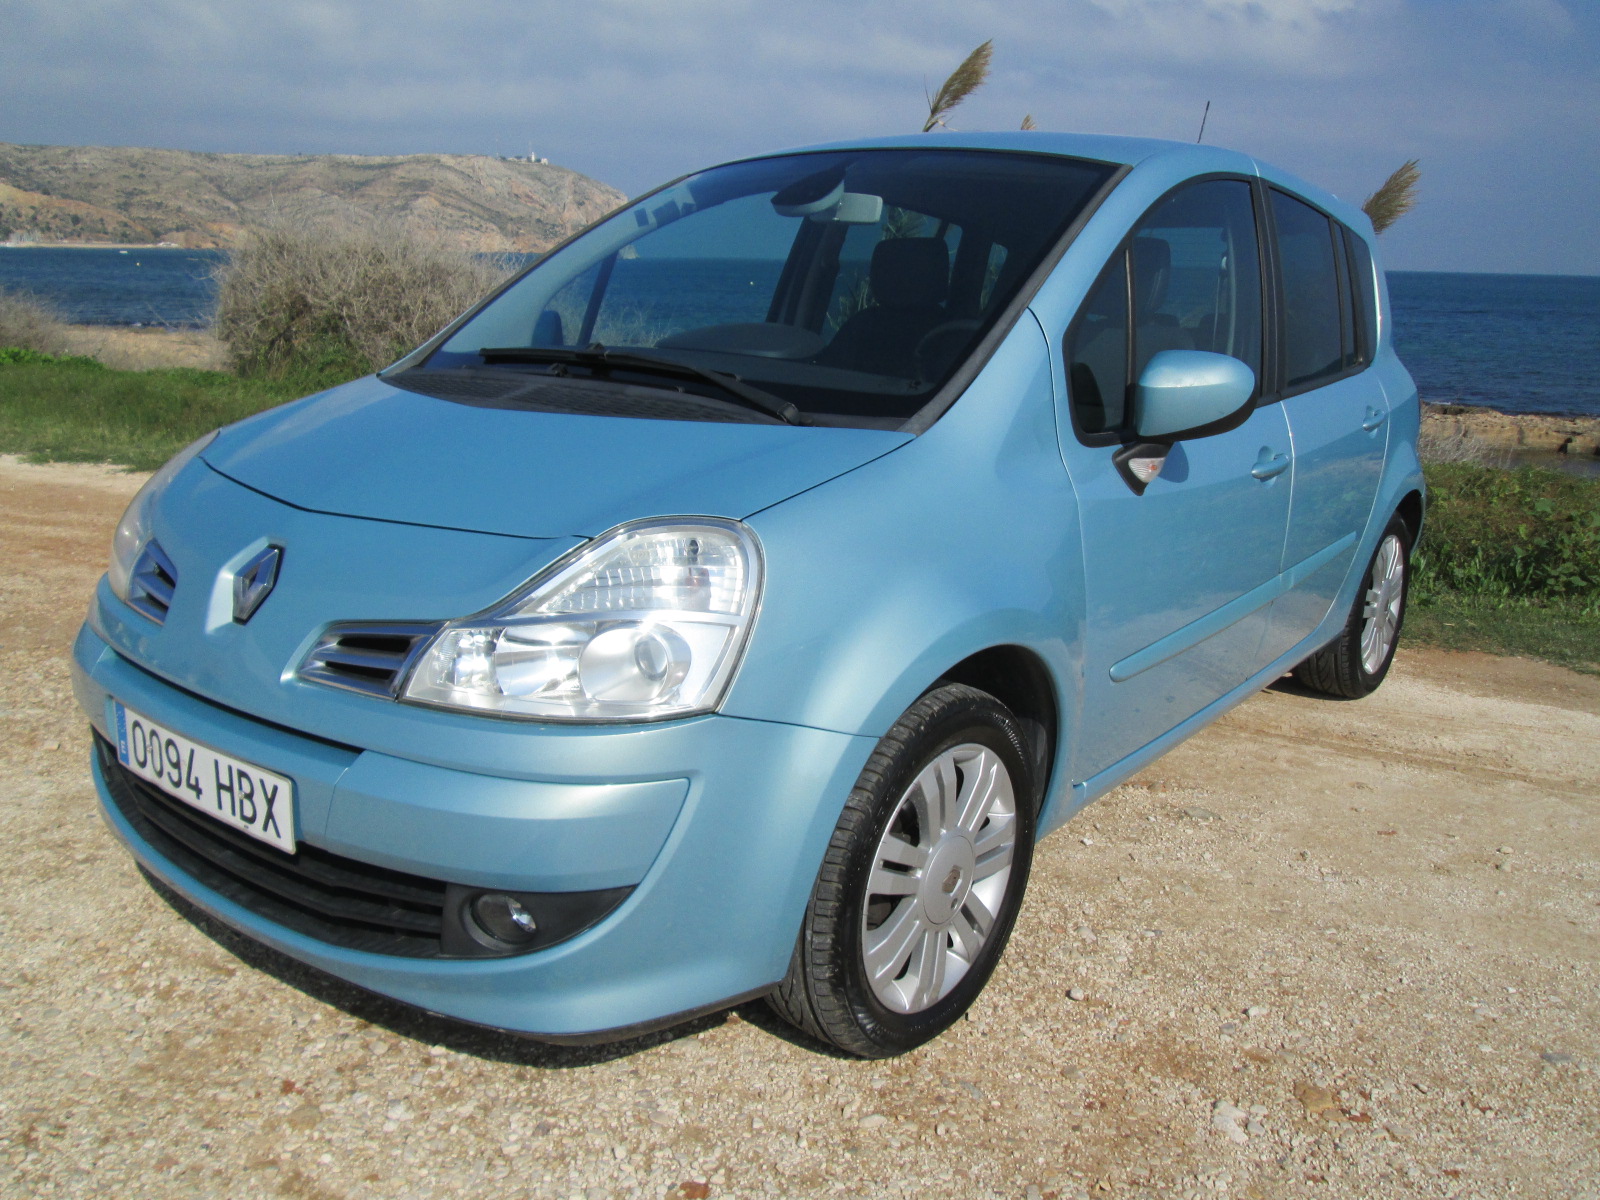 Renault Grand Modus 1.6 Automatic For Sale Mía Cars